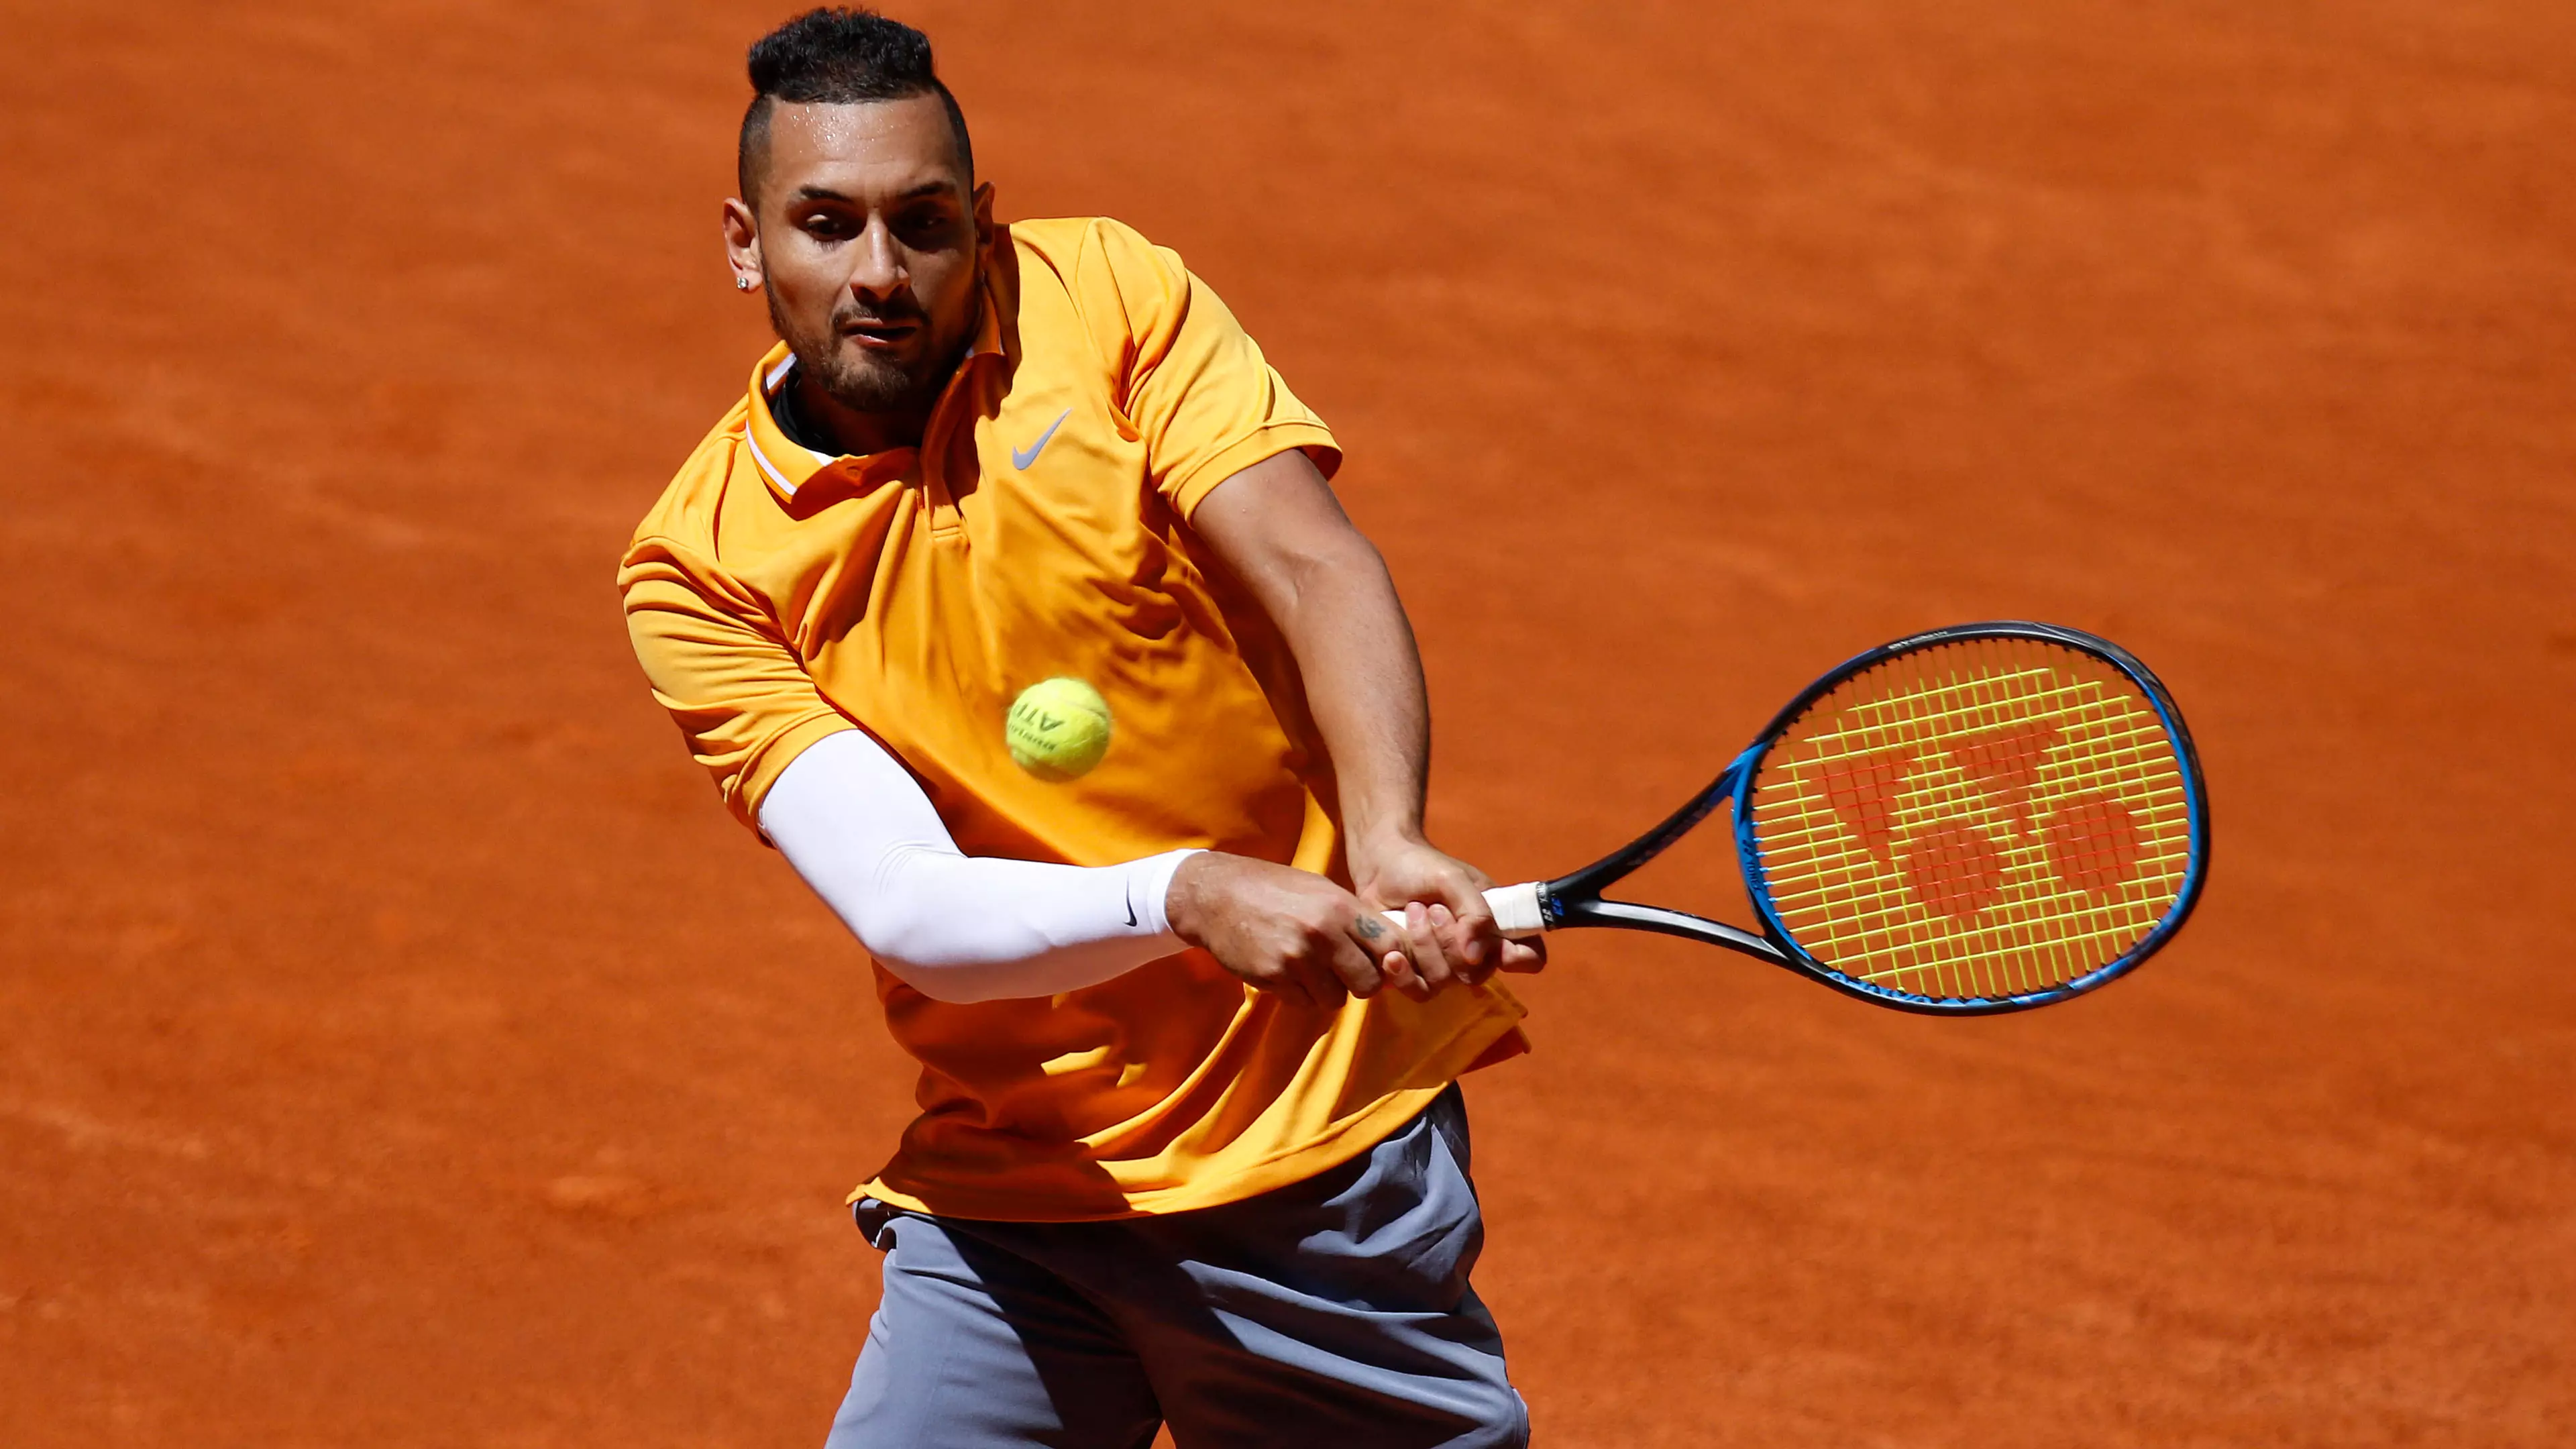 Nick Kyrgios Kicked Out Of Italian Open After Massive Meltdown